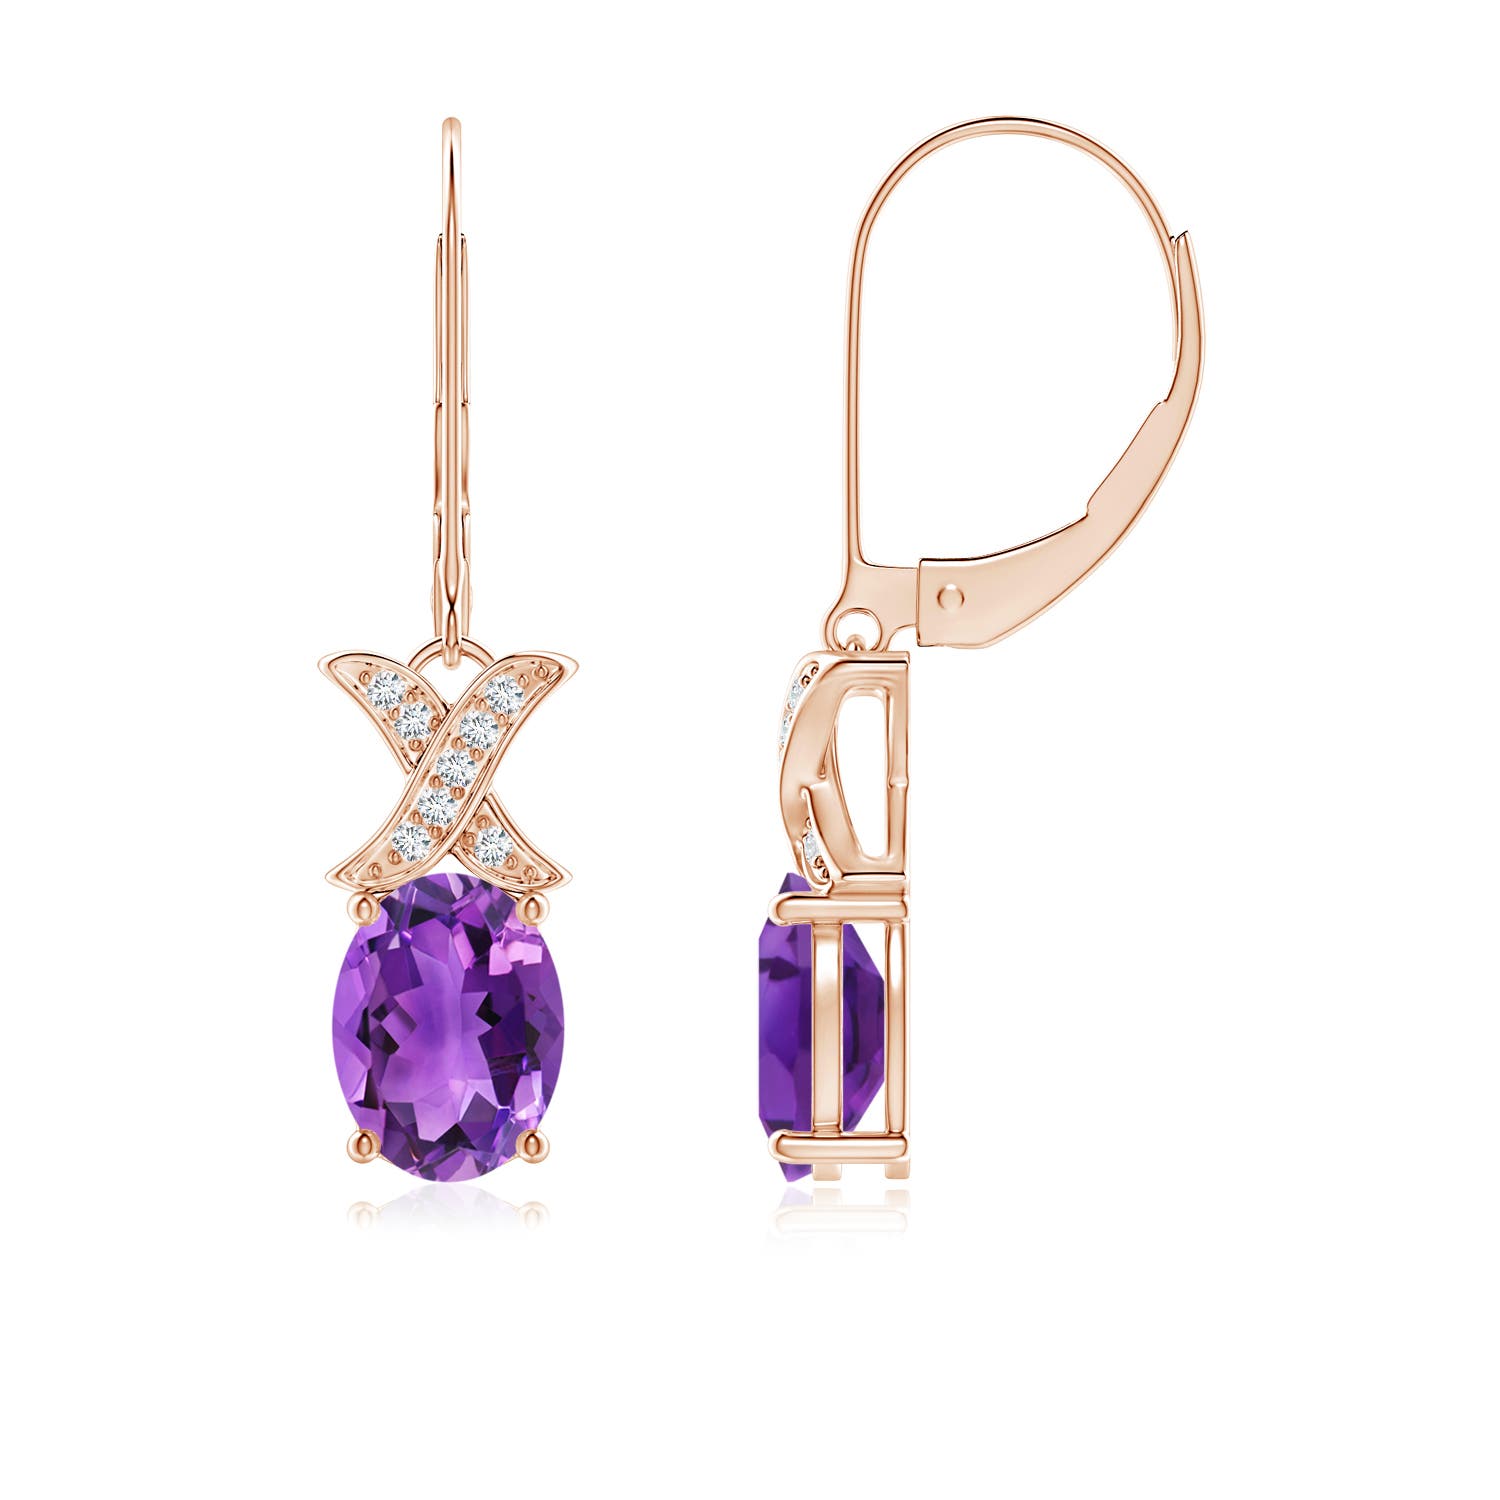 AAA - Amethyst / 2.38 CT / 14 KT Rose Gold